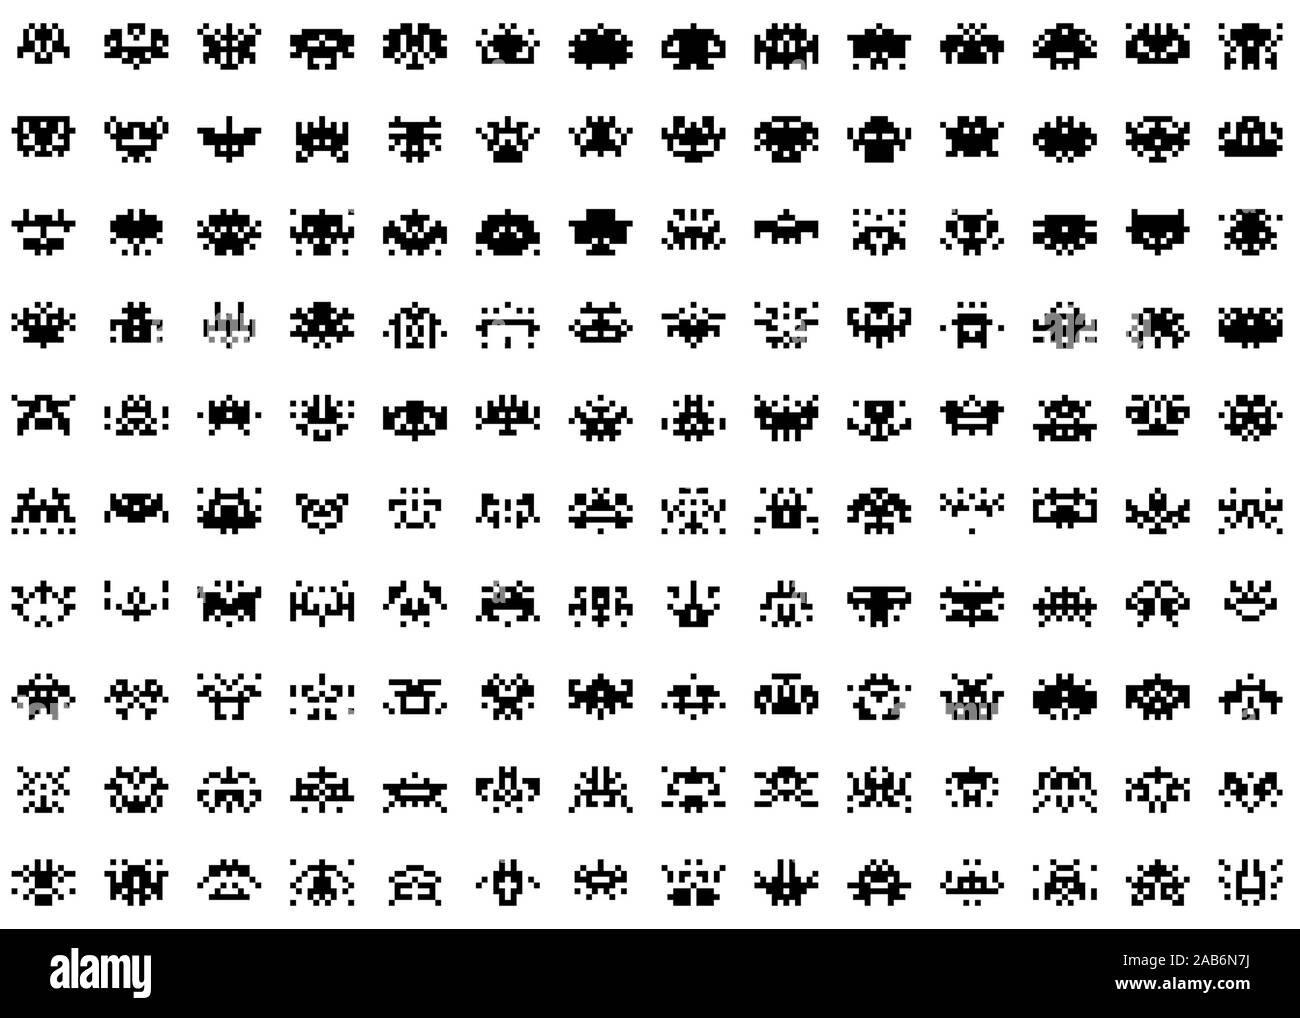 An illustration of a simple set of space invaders ufos Stock Photo